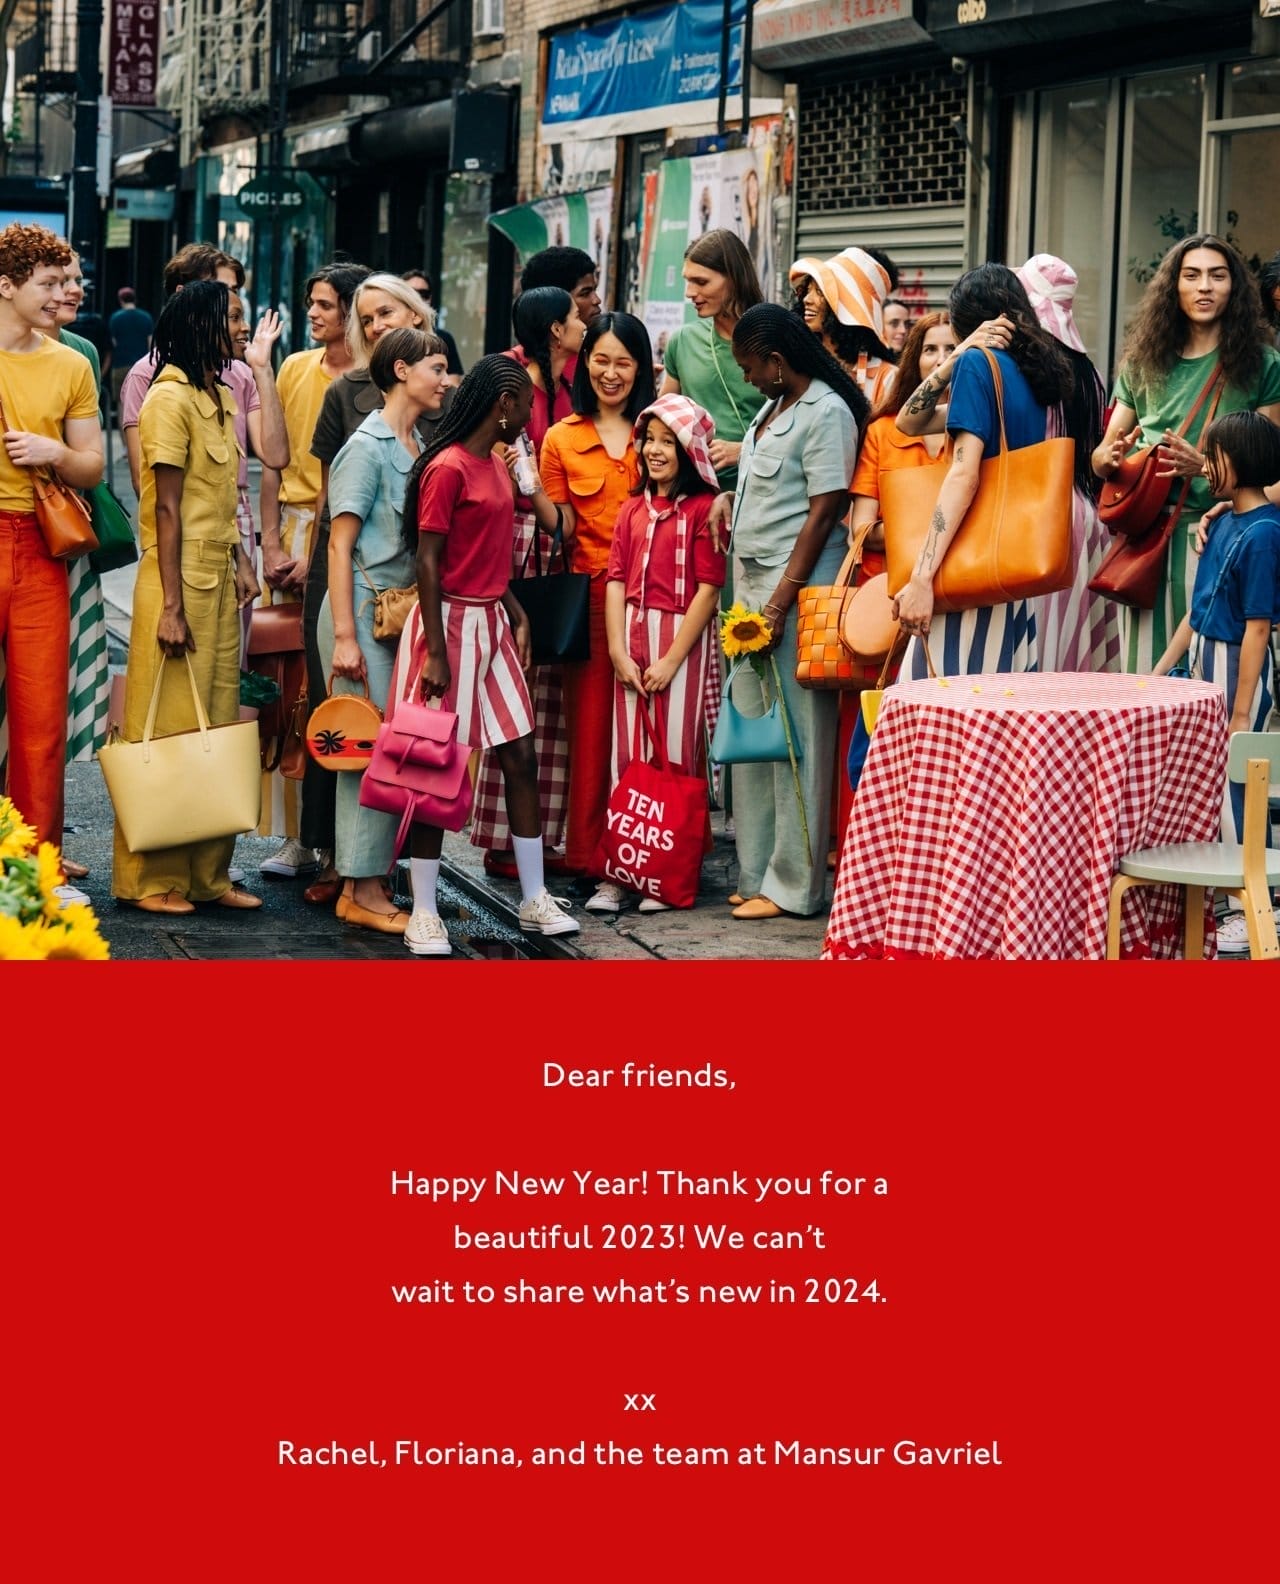 Dear friends, Happy New Year! Thank you for a beautiful 2023! We can't wait to share what's new in 2024. xx Rachel, Floriana, and the team at Mansur Gavriel.